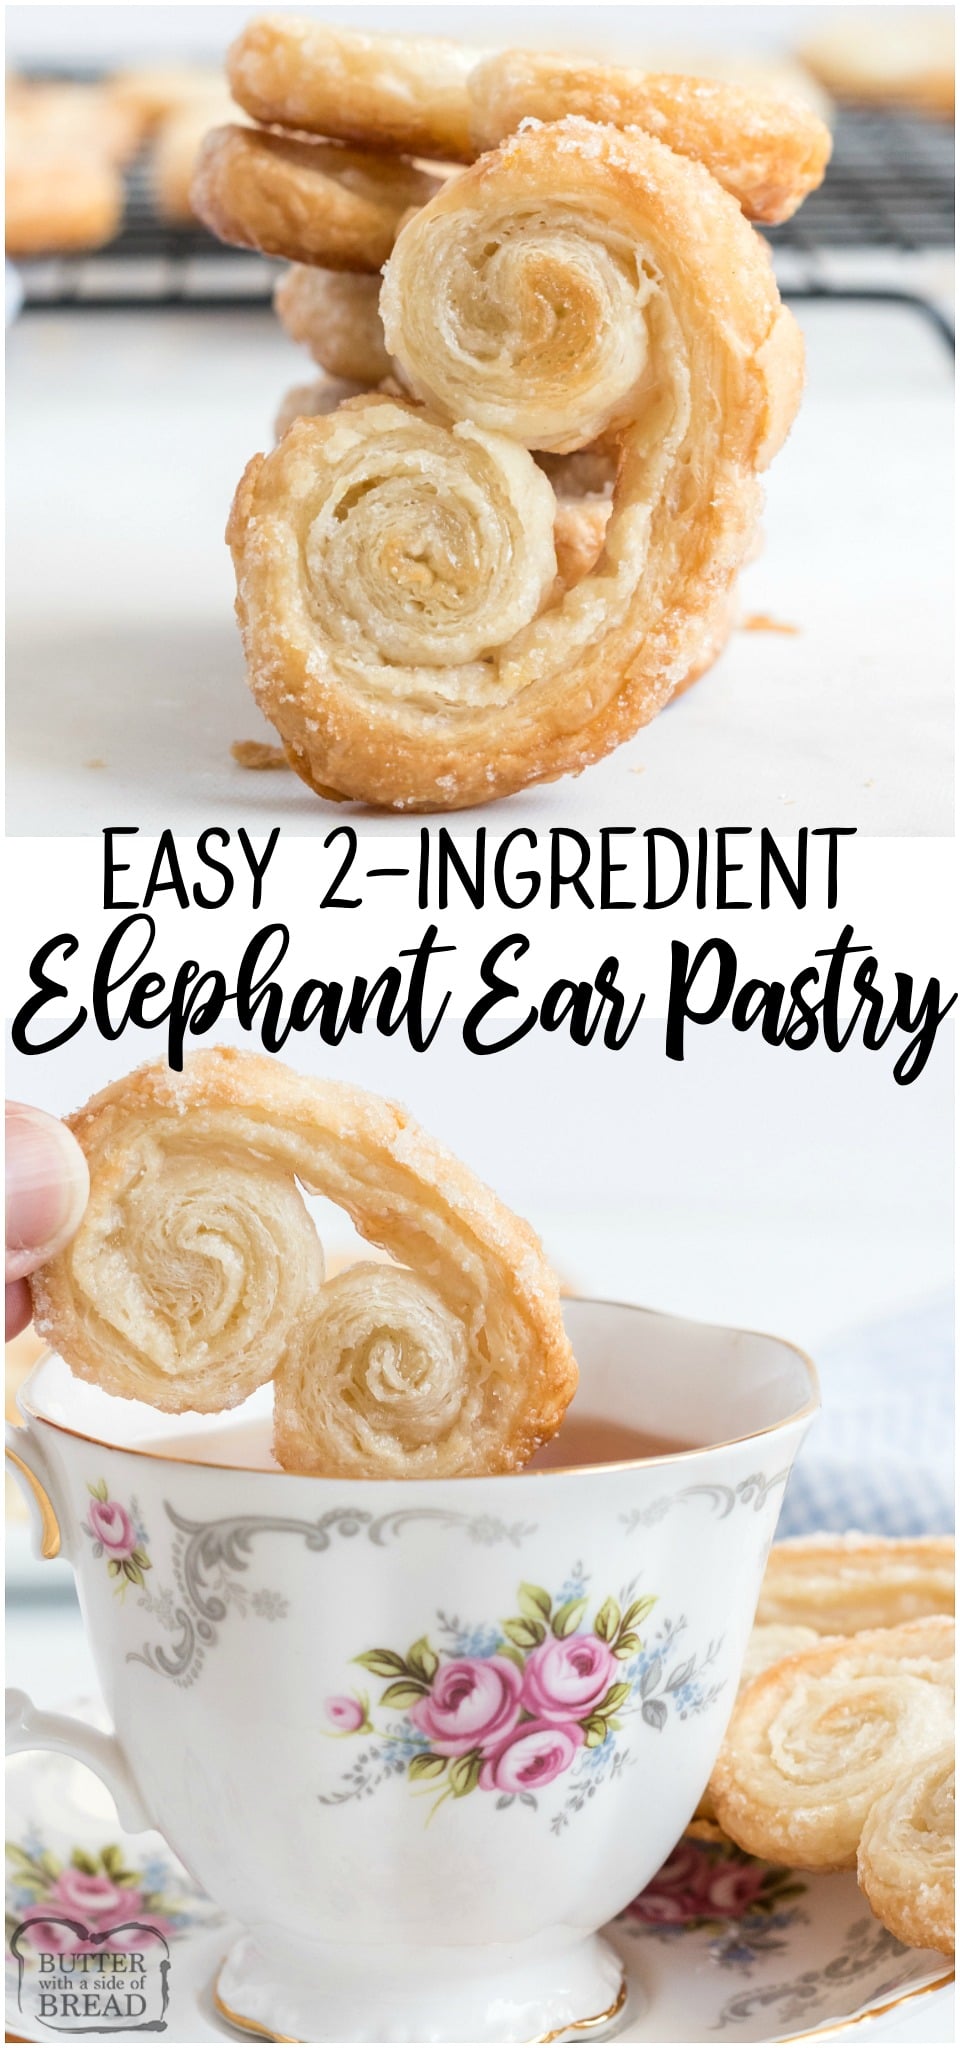 Elephant ears area delicious, buttery crisp sugar-covered french pastry that is also super simple to make! Just 2 INGREDIENTS and you can enjoy these Elephant Ear pastries at home! #pastry #French #elephantears #palmiers #cookies #easyrecipe from BUTTER WITH A SIDE OF BREAD